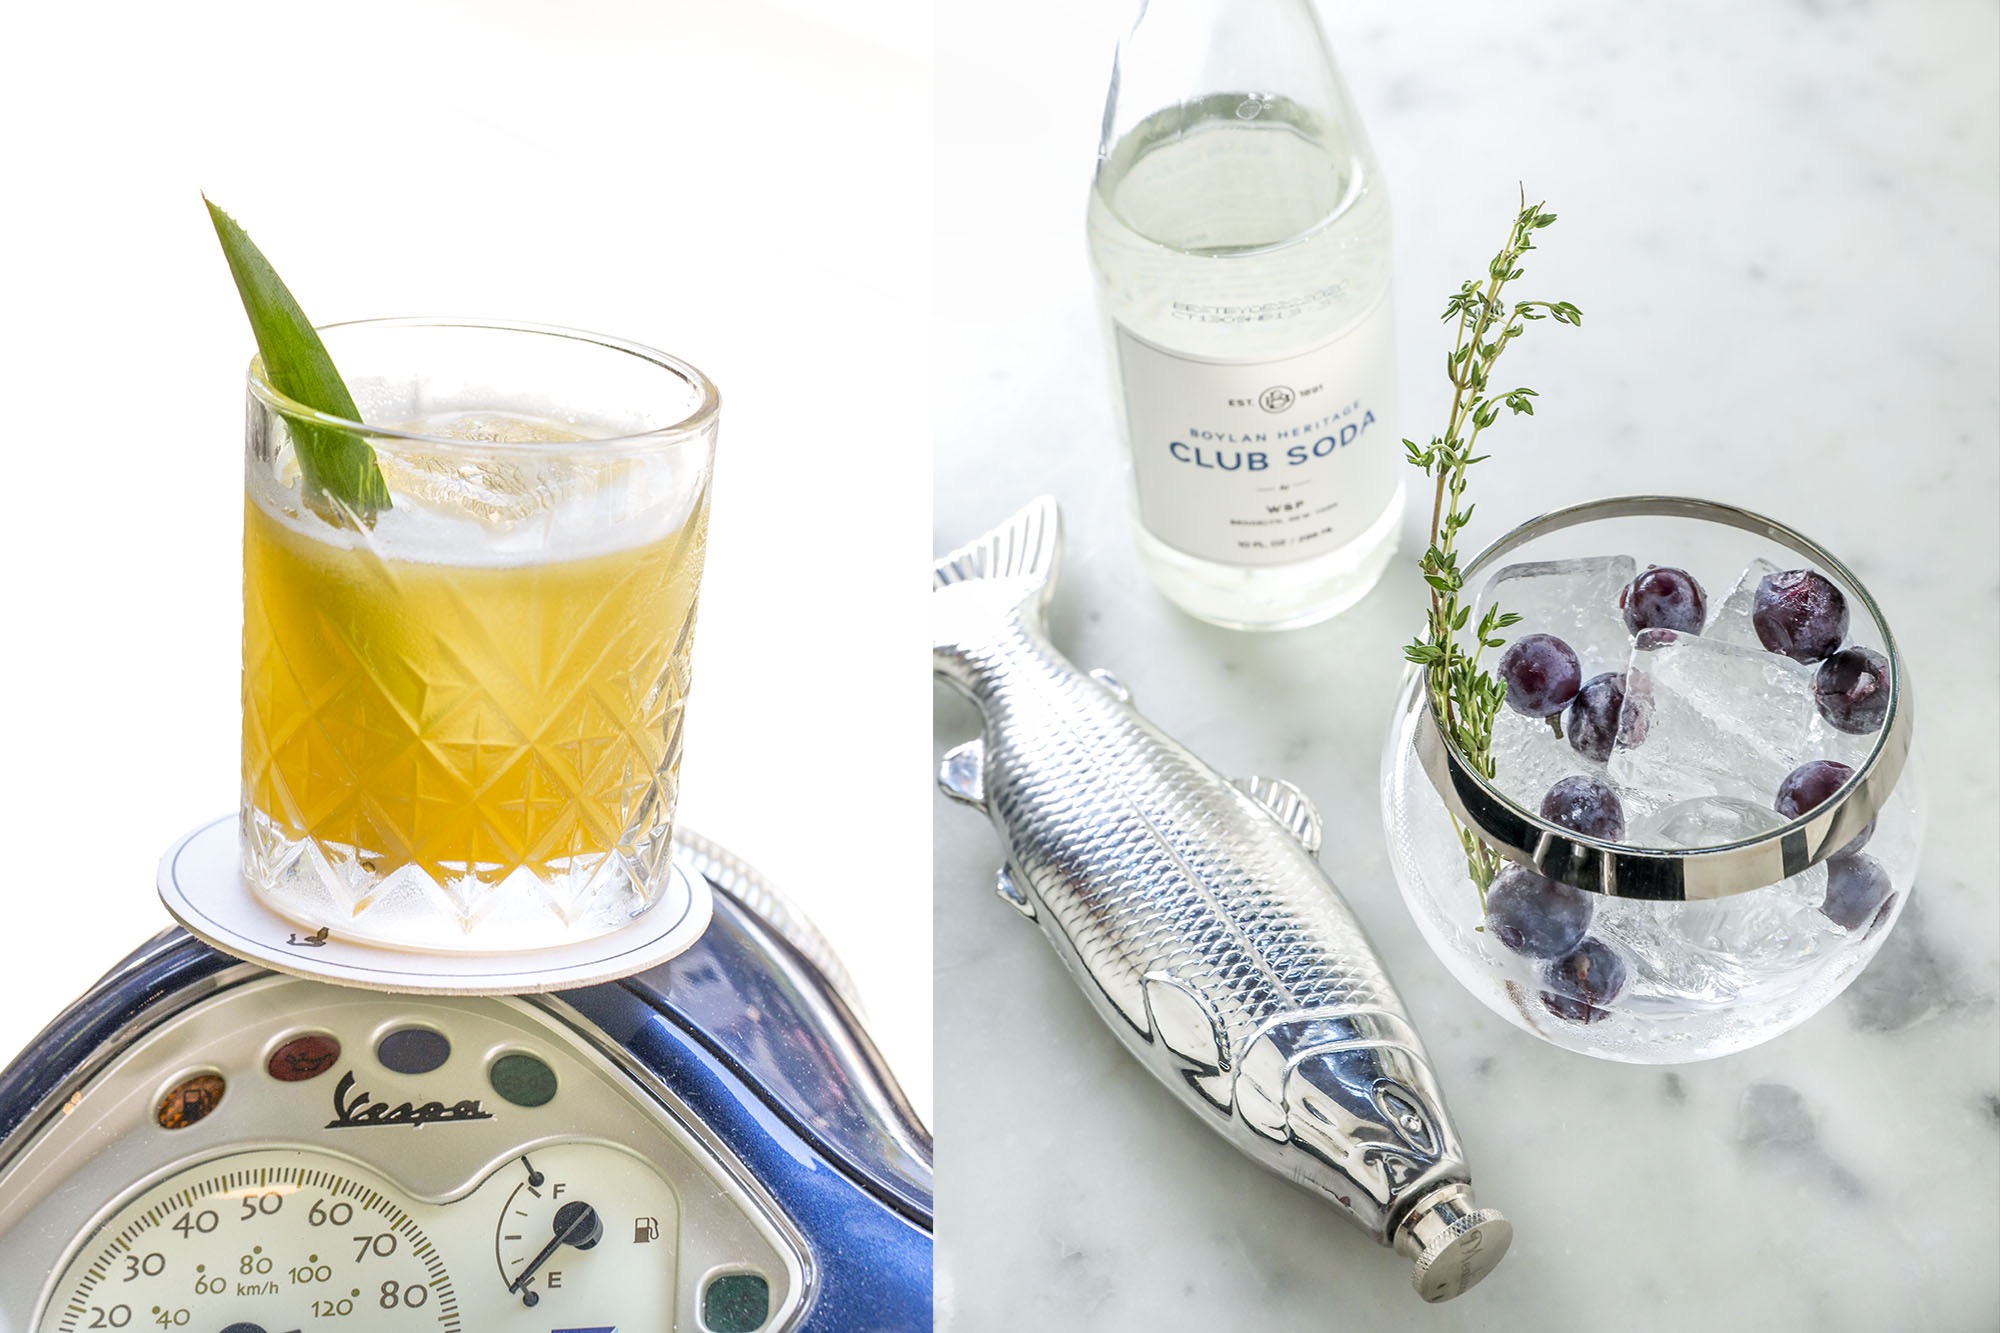 An Italian cocktail on a Vespa. And a cocktail served in a flask with blueberries and thyme.